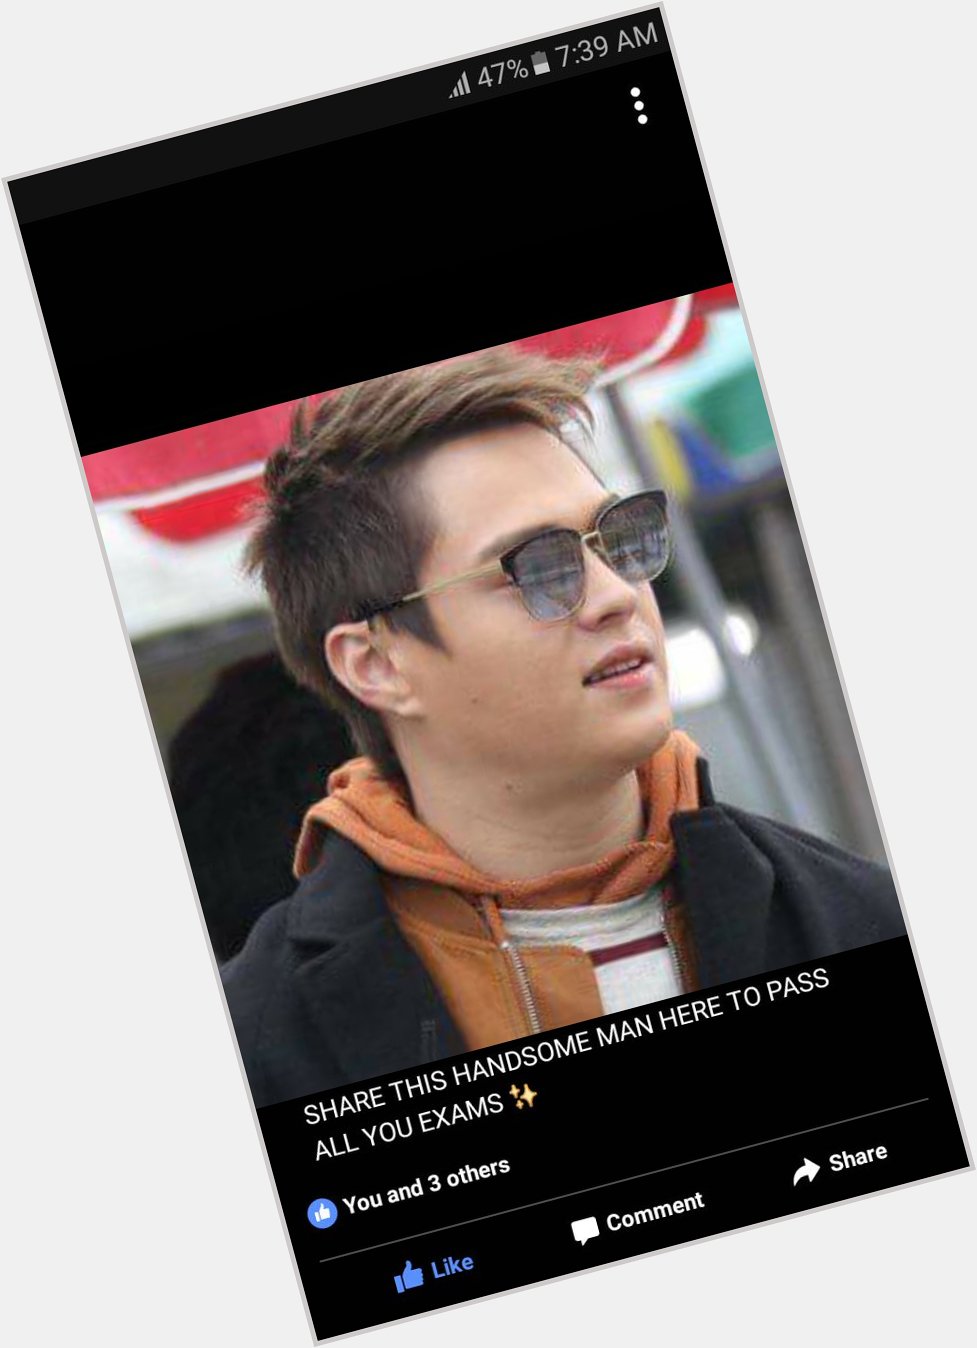 Its your day your birthday Happy happy birthday Enrique Gil Wish you good health always More Projects God Bless  